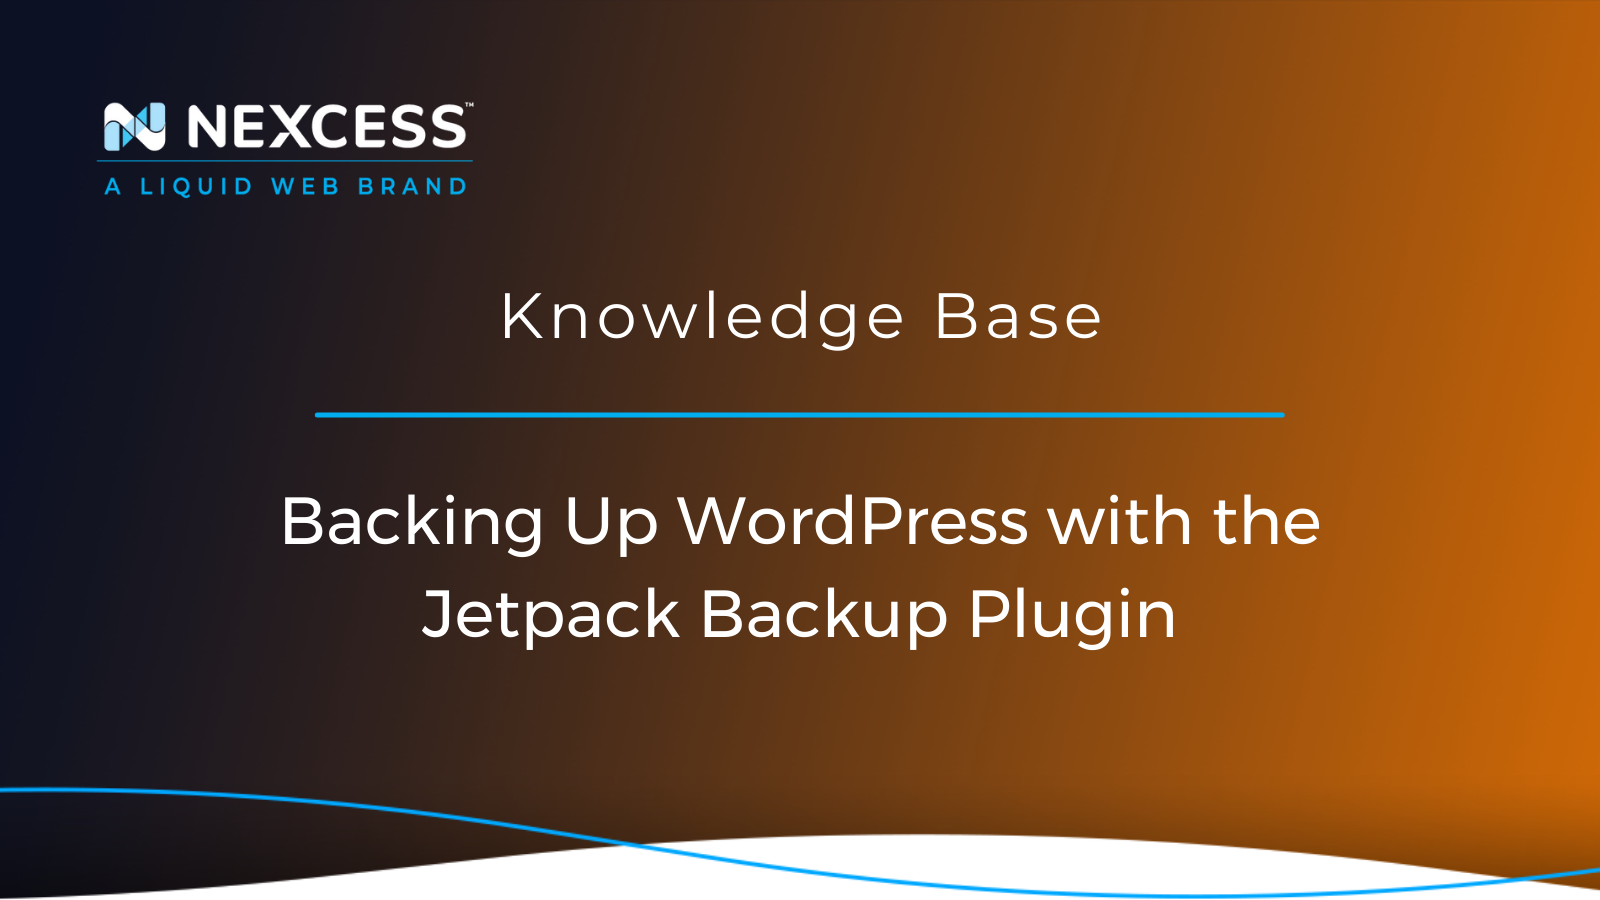 Backing Up WordPress with the Jetpack Backup Plugin